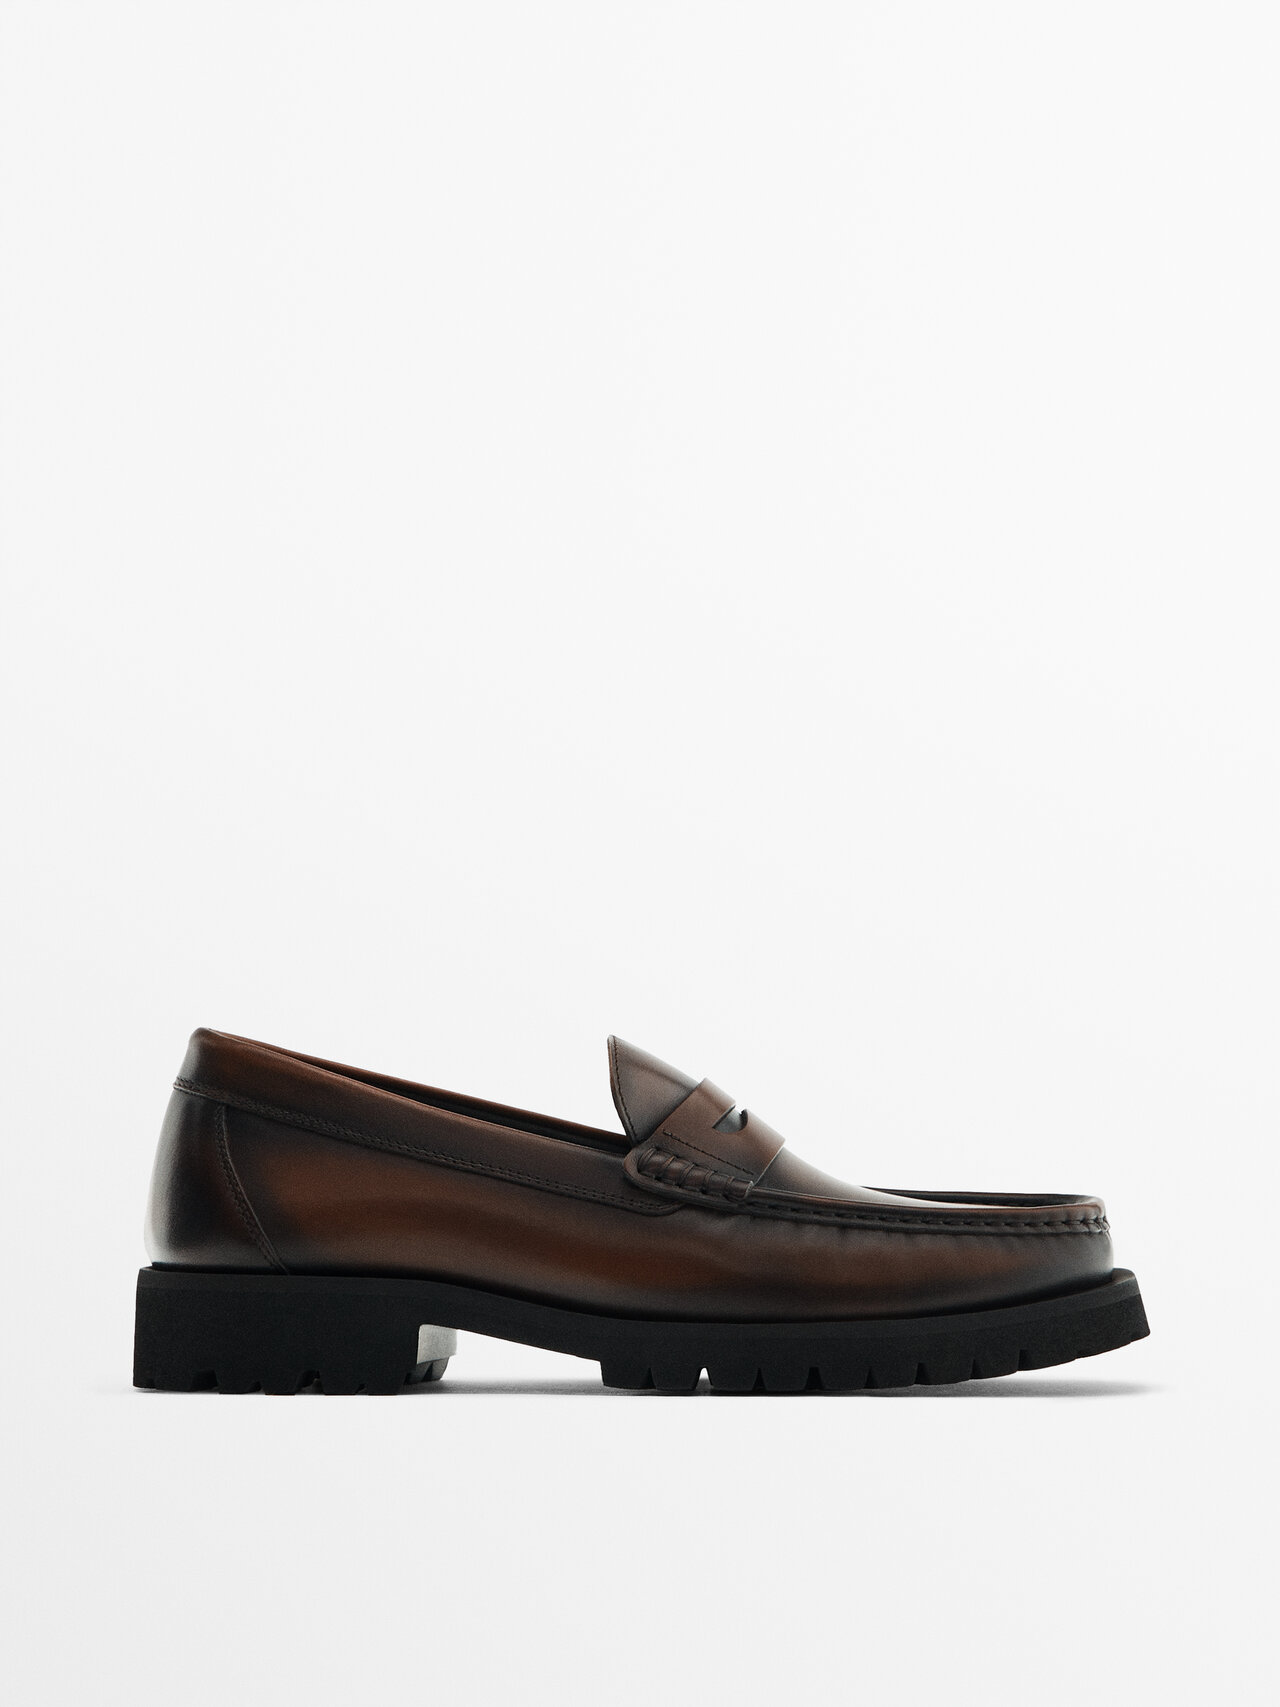 Massimo Dutti Brushed Nappa Leather Loafers - Studio In Tan